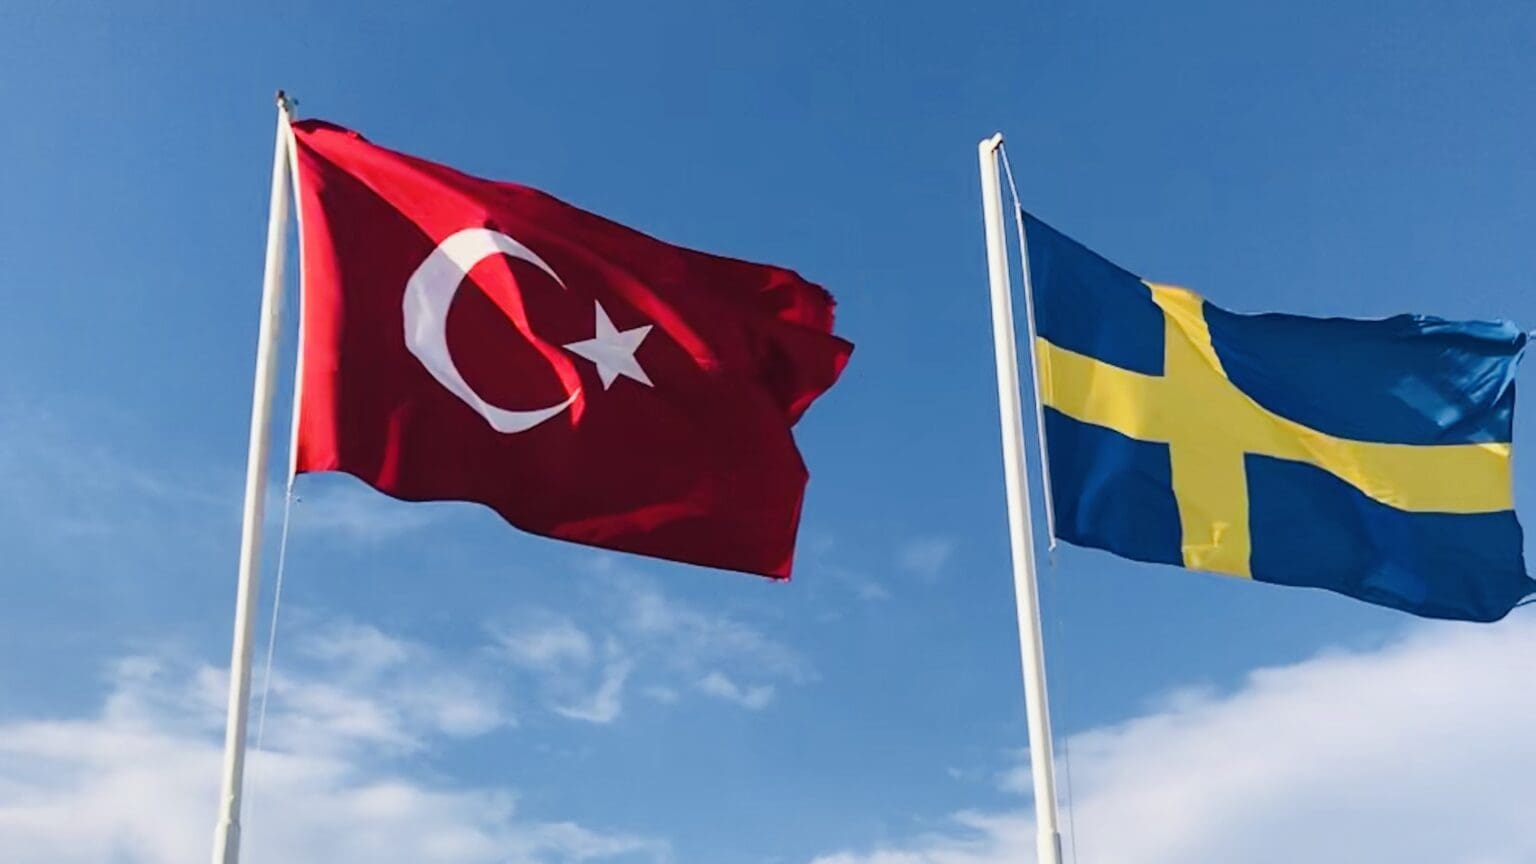 Sweden Inches Closer to NATO Membership with Türkiye’s Approval